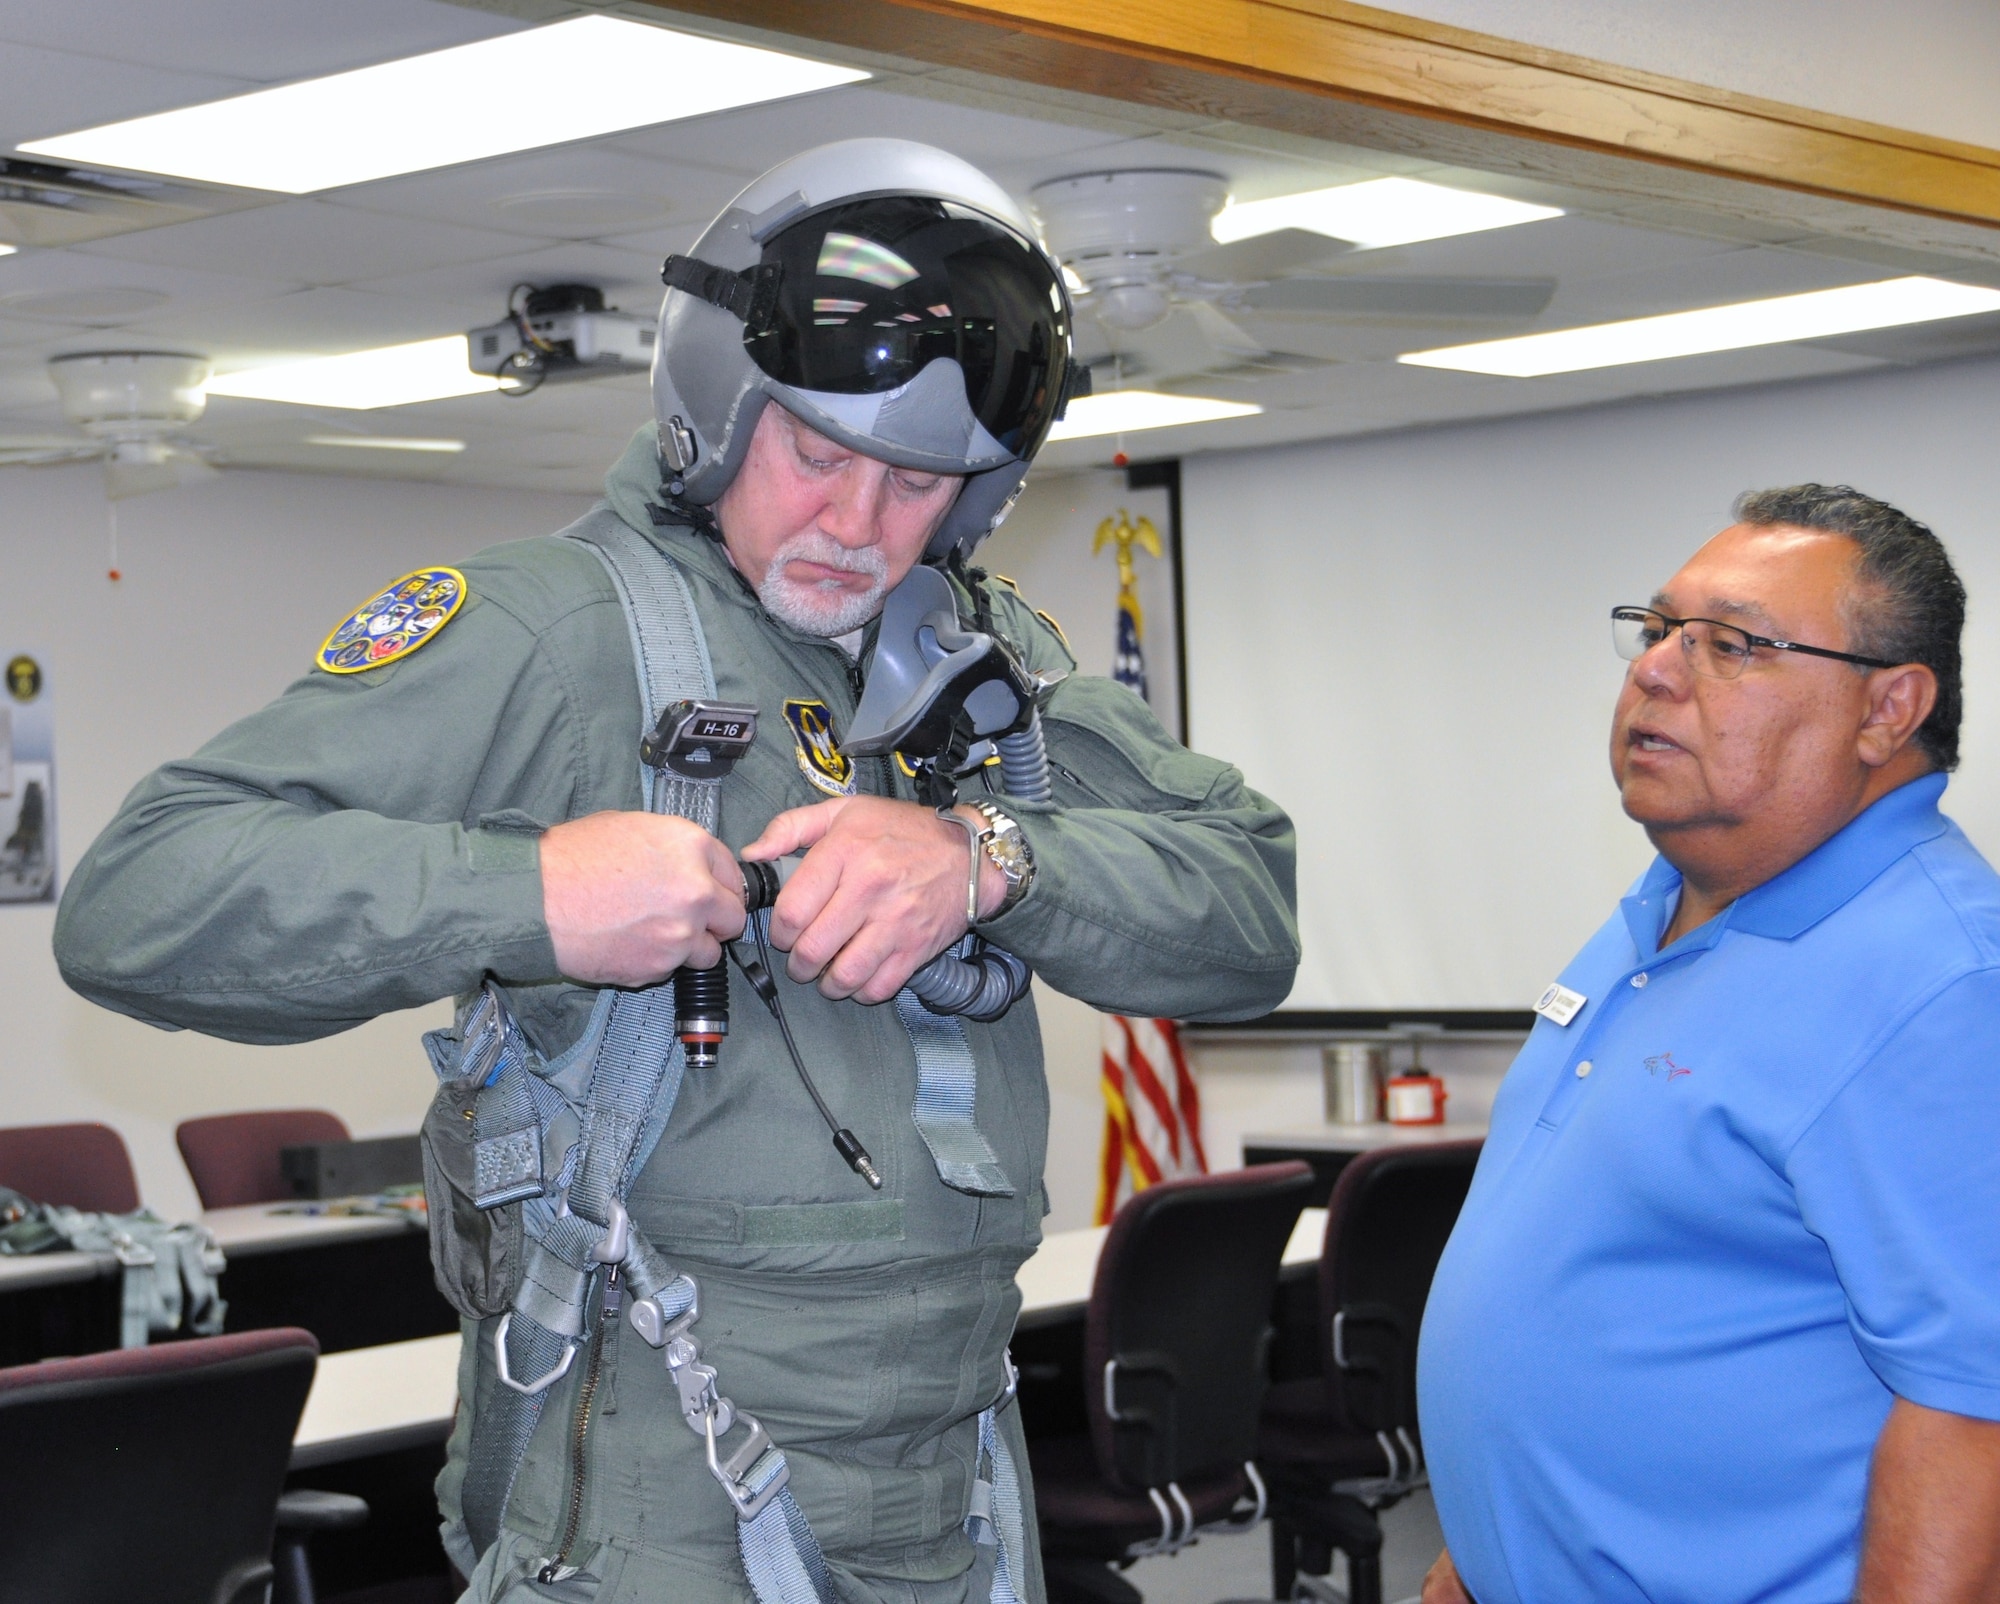 Ray Gutierrez, flight equipment life support technicians with the 559 Flying Squadron at Joint Base San Antonio-Randolph, Texas, makes final G-suit adjustments for John Fedrico, deputy assistant Secretary of the Air Force for  Reserve Affairs and Airman Readiness in preparation for a T-6 orientation flight here Feb. 13. Fedrico’s visit, hosted by the 340 FTG, served a dual purpose. Fedrico presented a letter of thanks to one of the unit’s own, retired Air Force Lt. Col. Todd Ernst. Ernst was honored for his efforts to help ensure families of Reserve and Guard service members receive the same survivor benefits as active duty service members. Fedrico also received a mission brief and got to experience the unit’s operations first hand. (Air Force photo by Janis El Shabazz, 340 FTG Public Affairs)